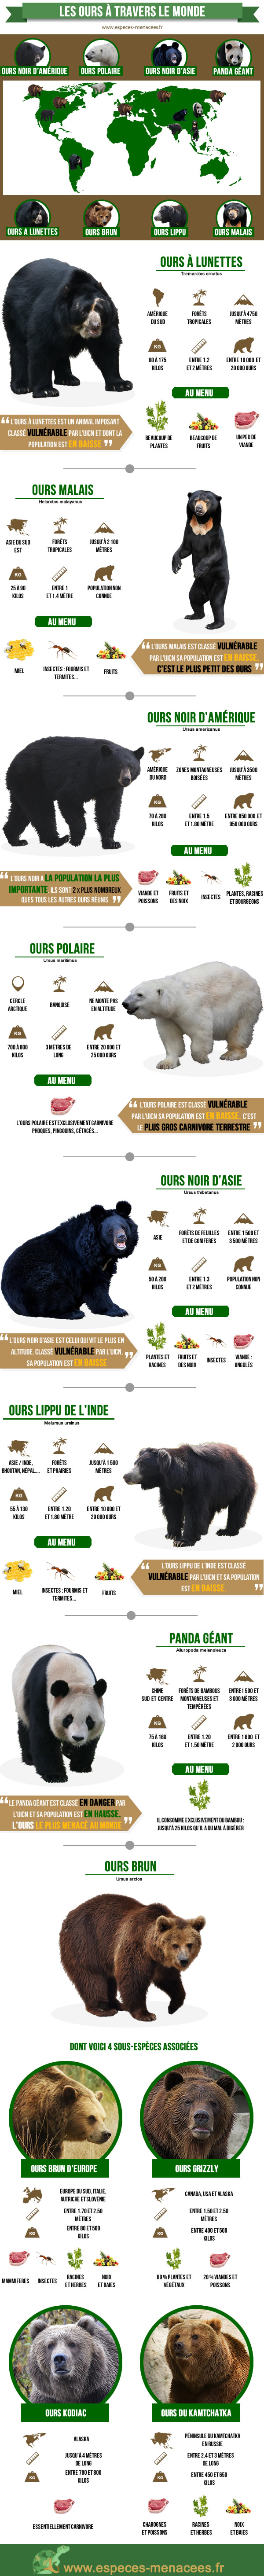 infographie ours